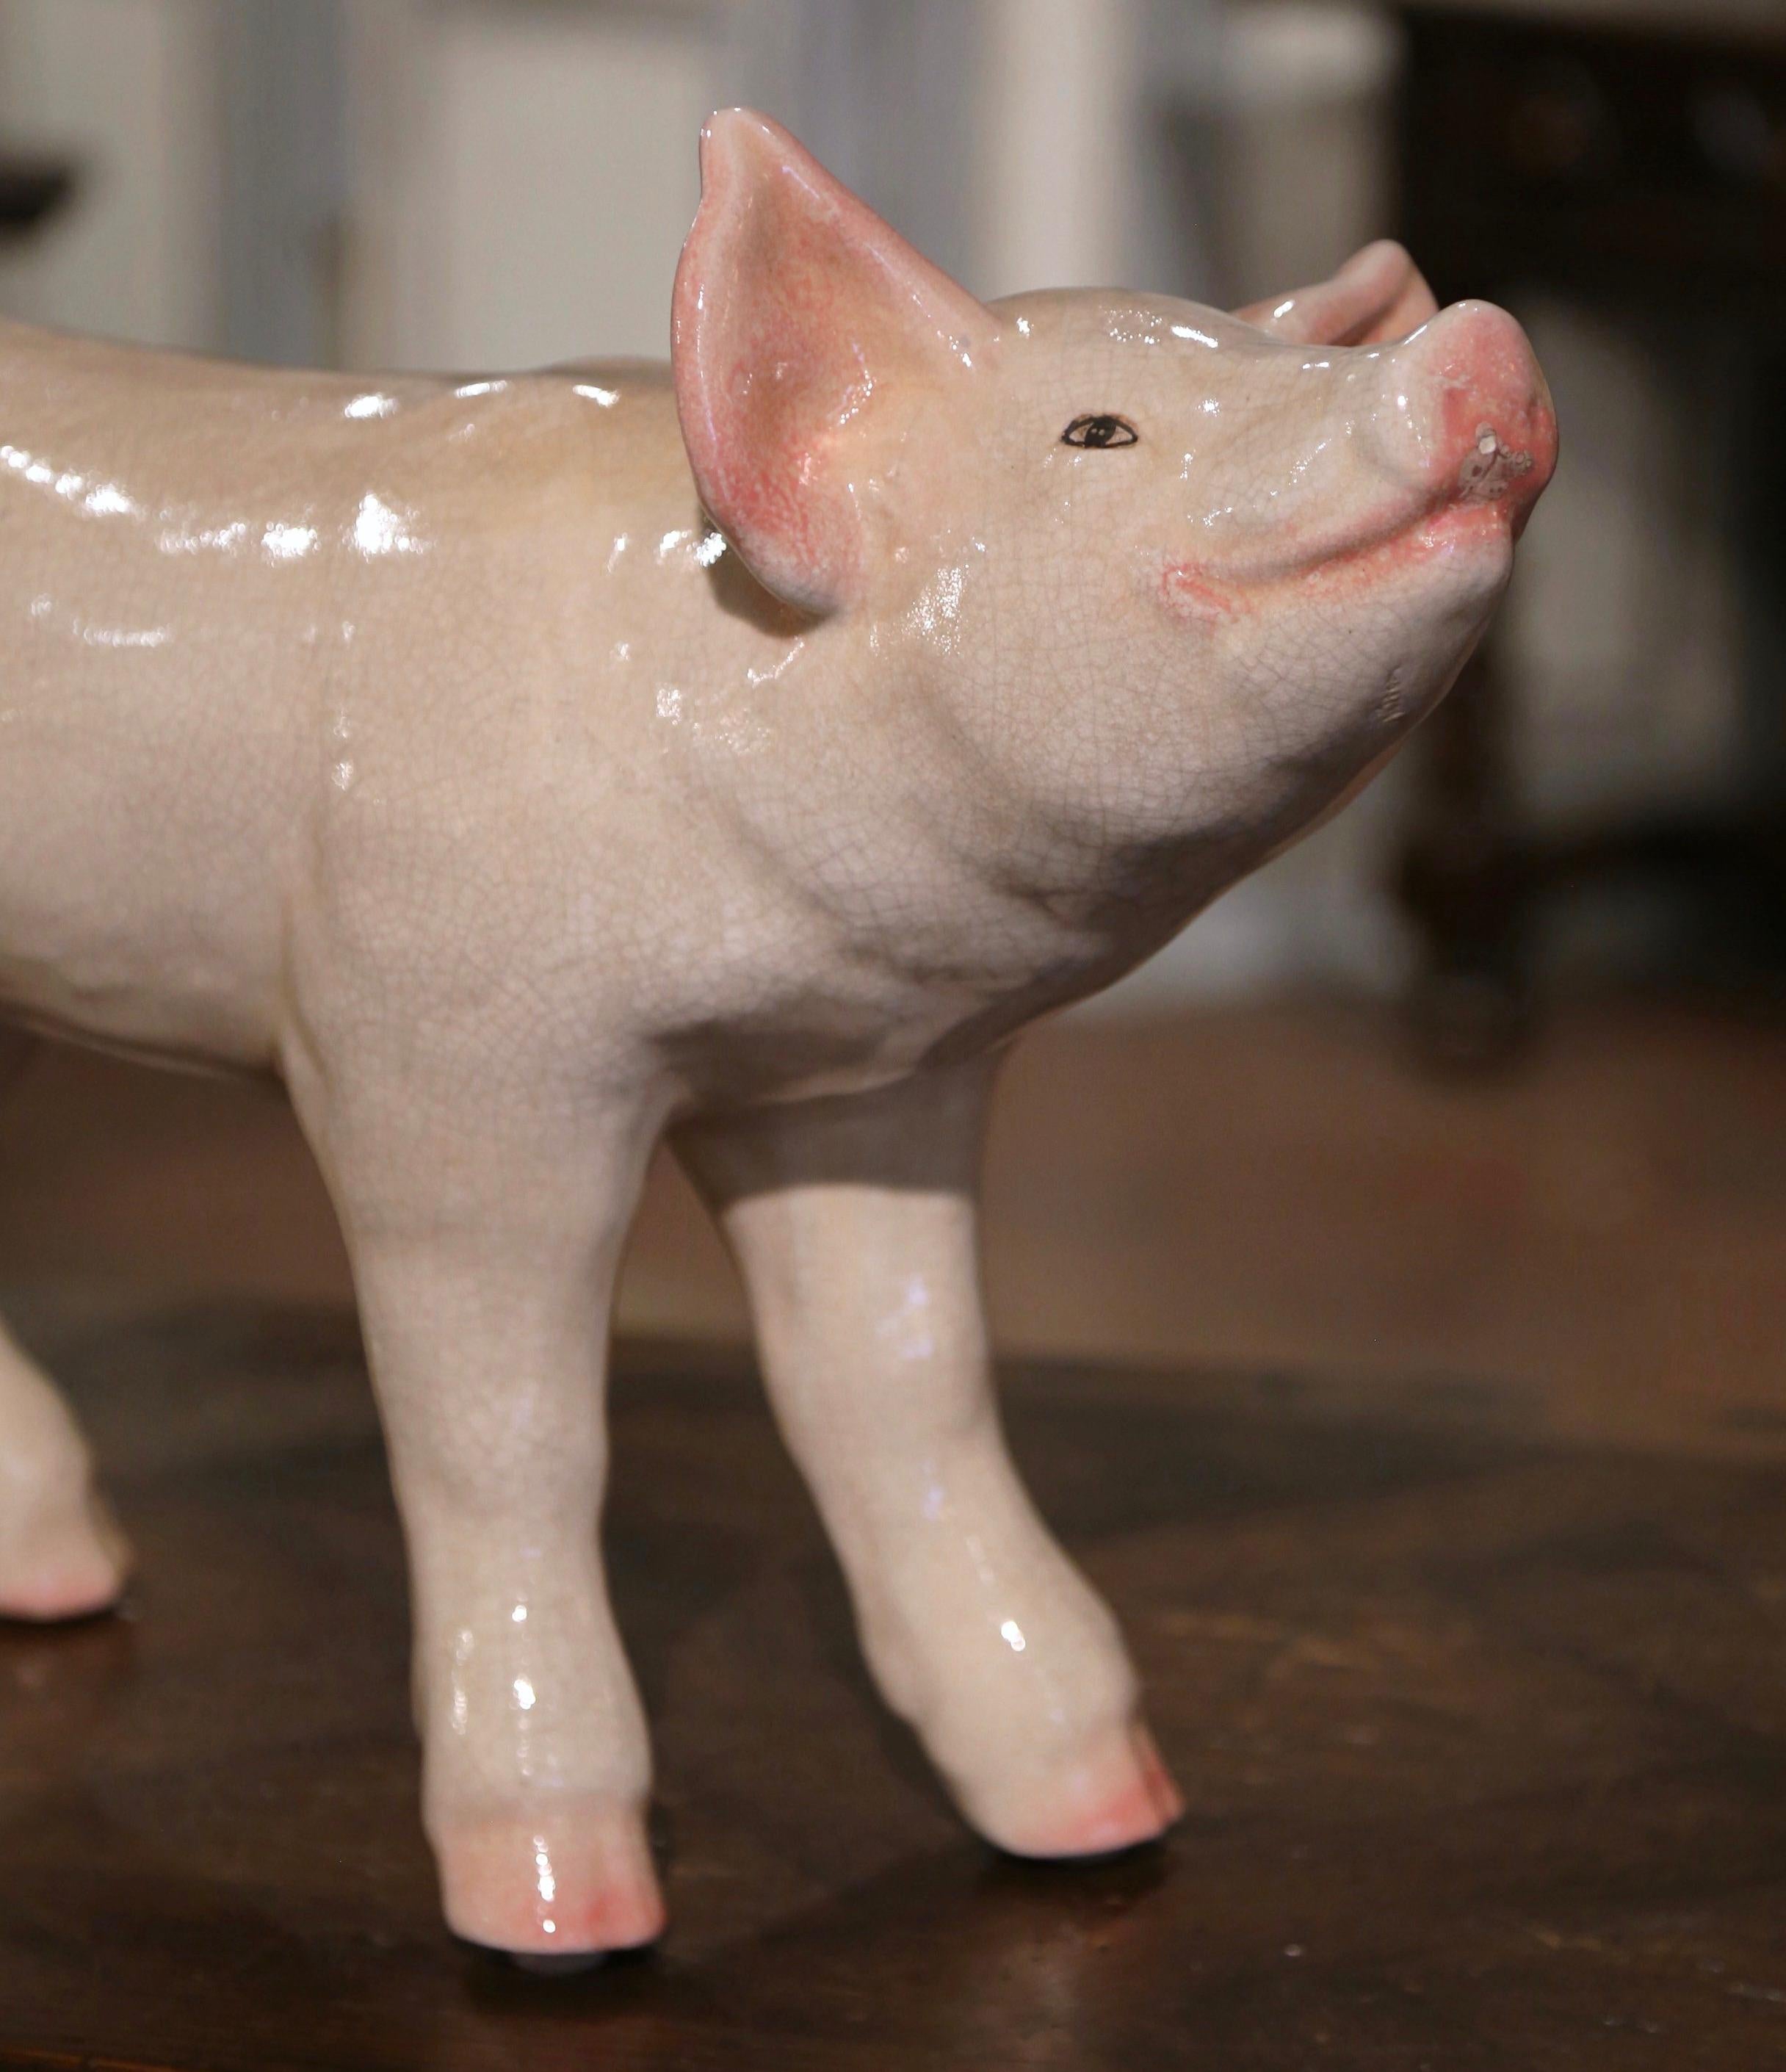 Hand-Painted Late 20th Century Crackled Ceramic Pig Sculpture Attributed to Townsend